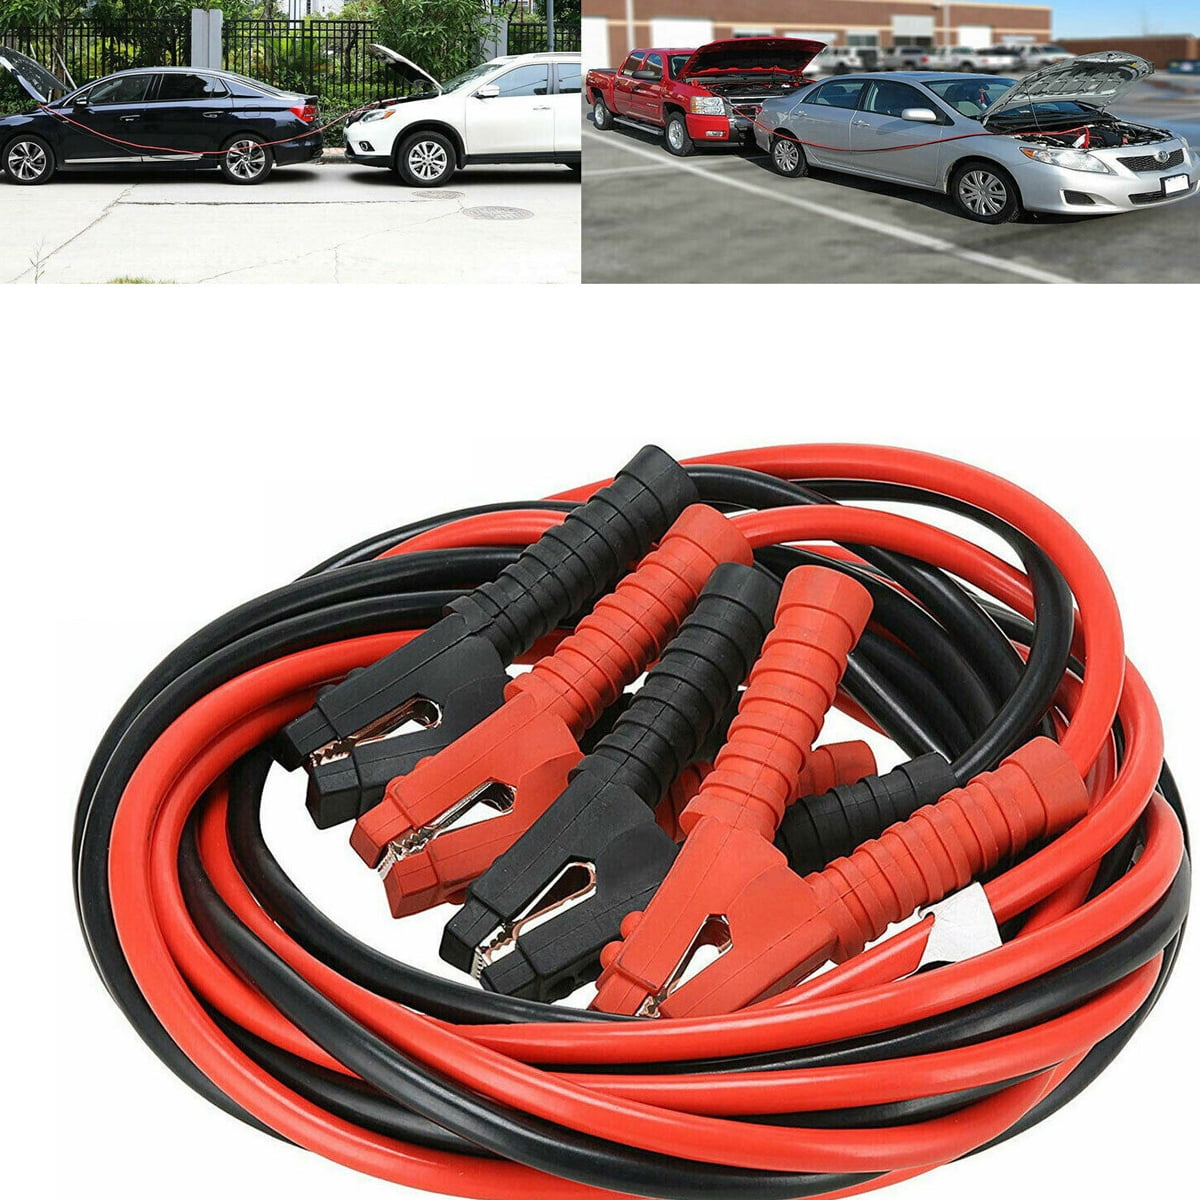 3000AMP 0 Gauge Booster Cables Jumper Leads Heavy Duty Car Van Clamps Start  20FT 